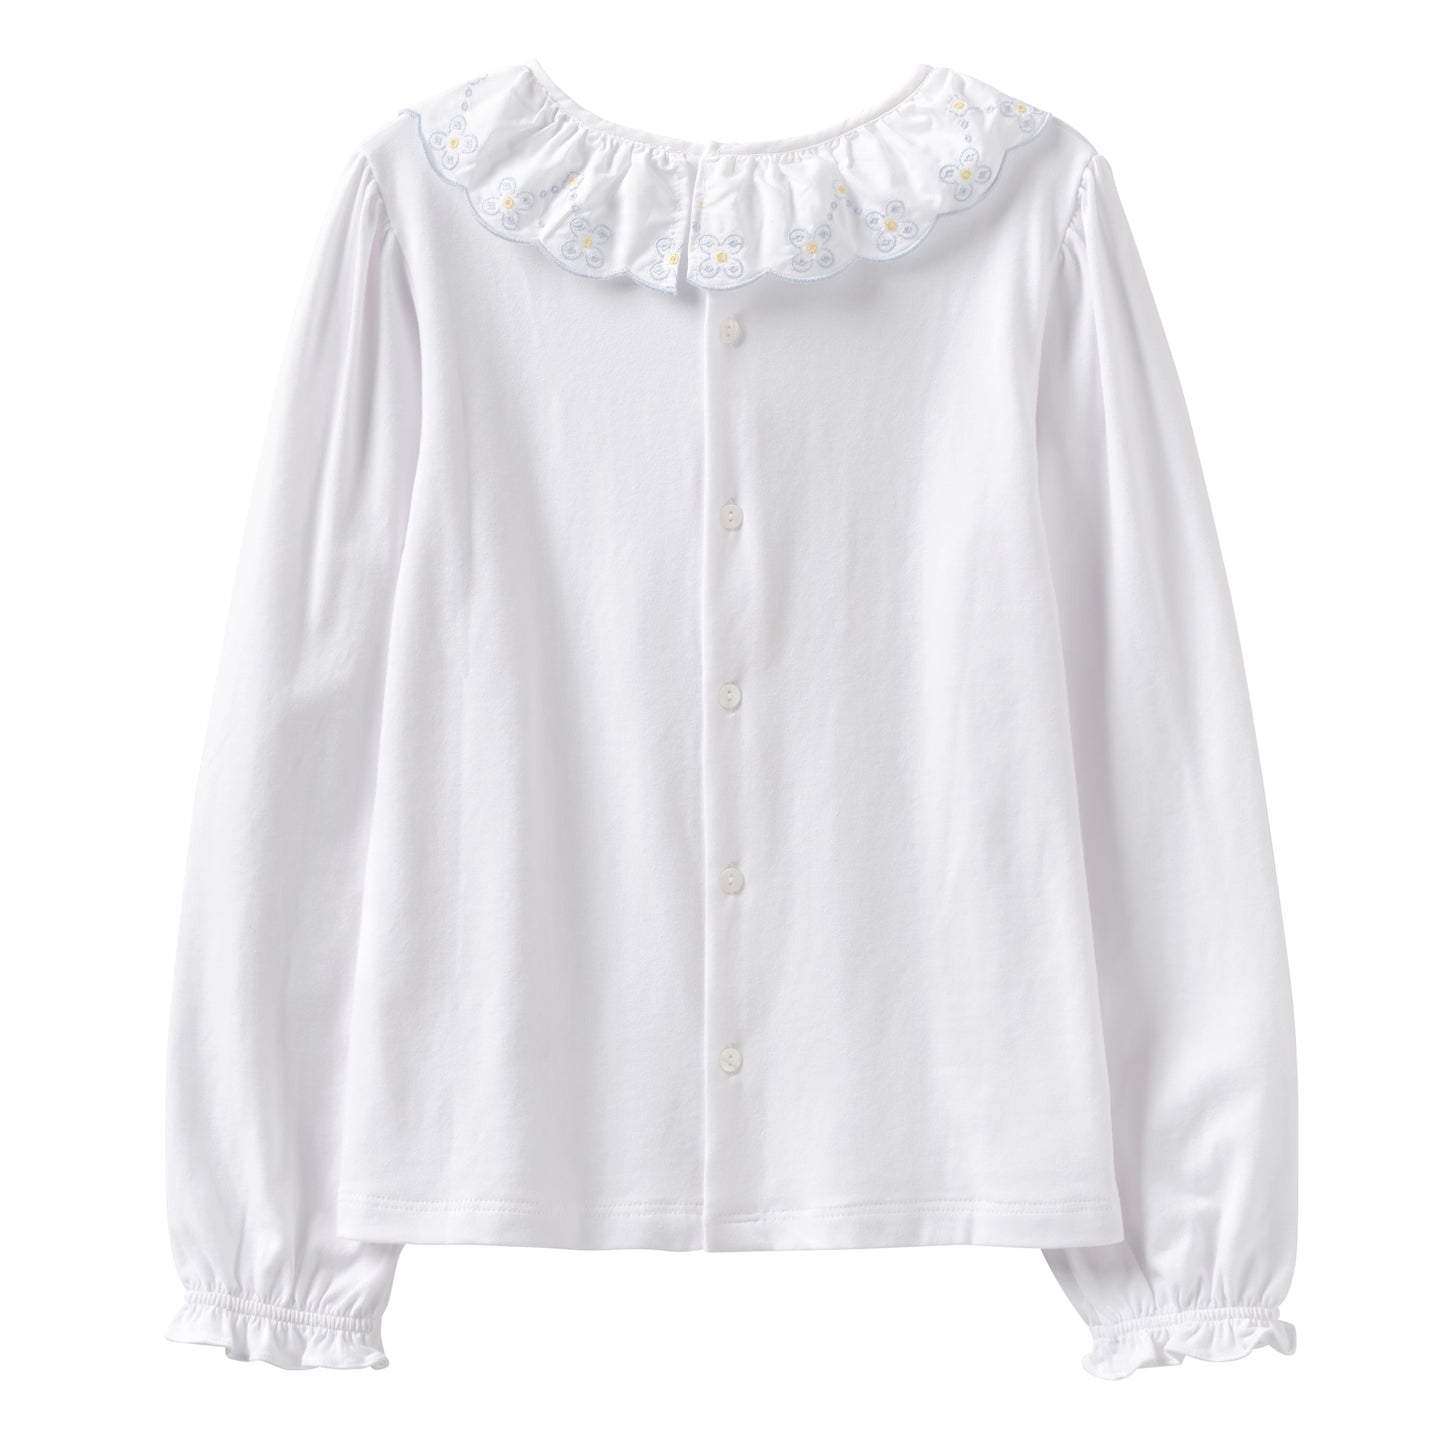 Startsmart White Jersey Cotton Blouse with Embroidered Collar